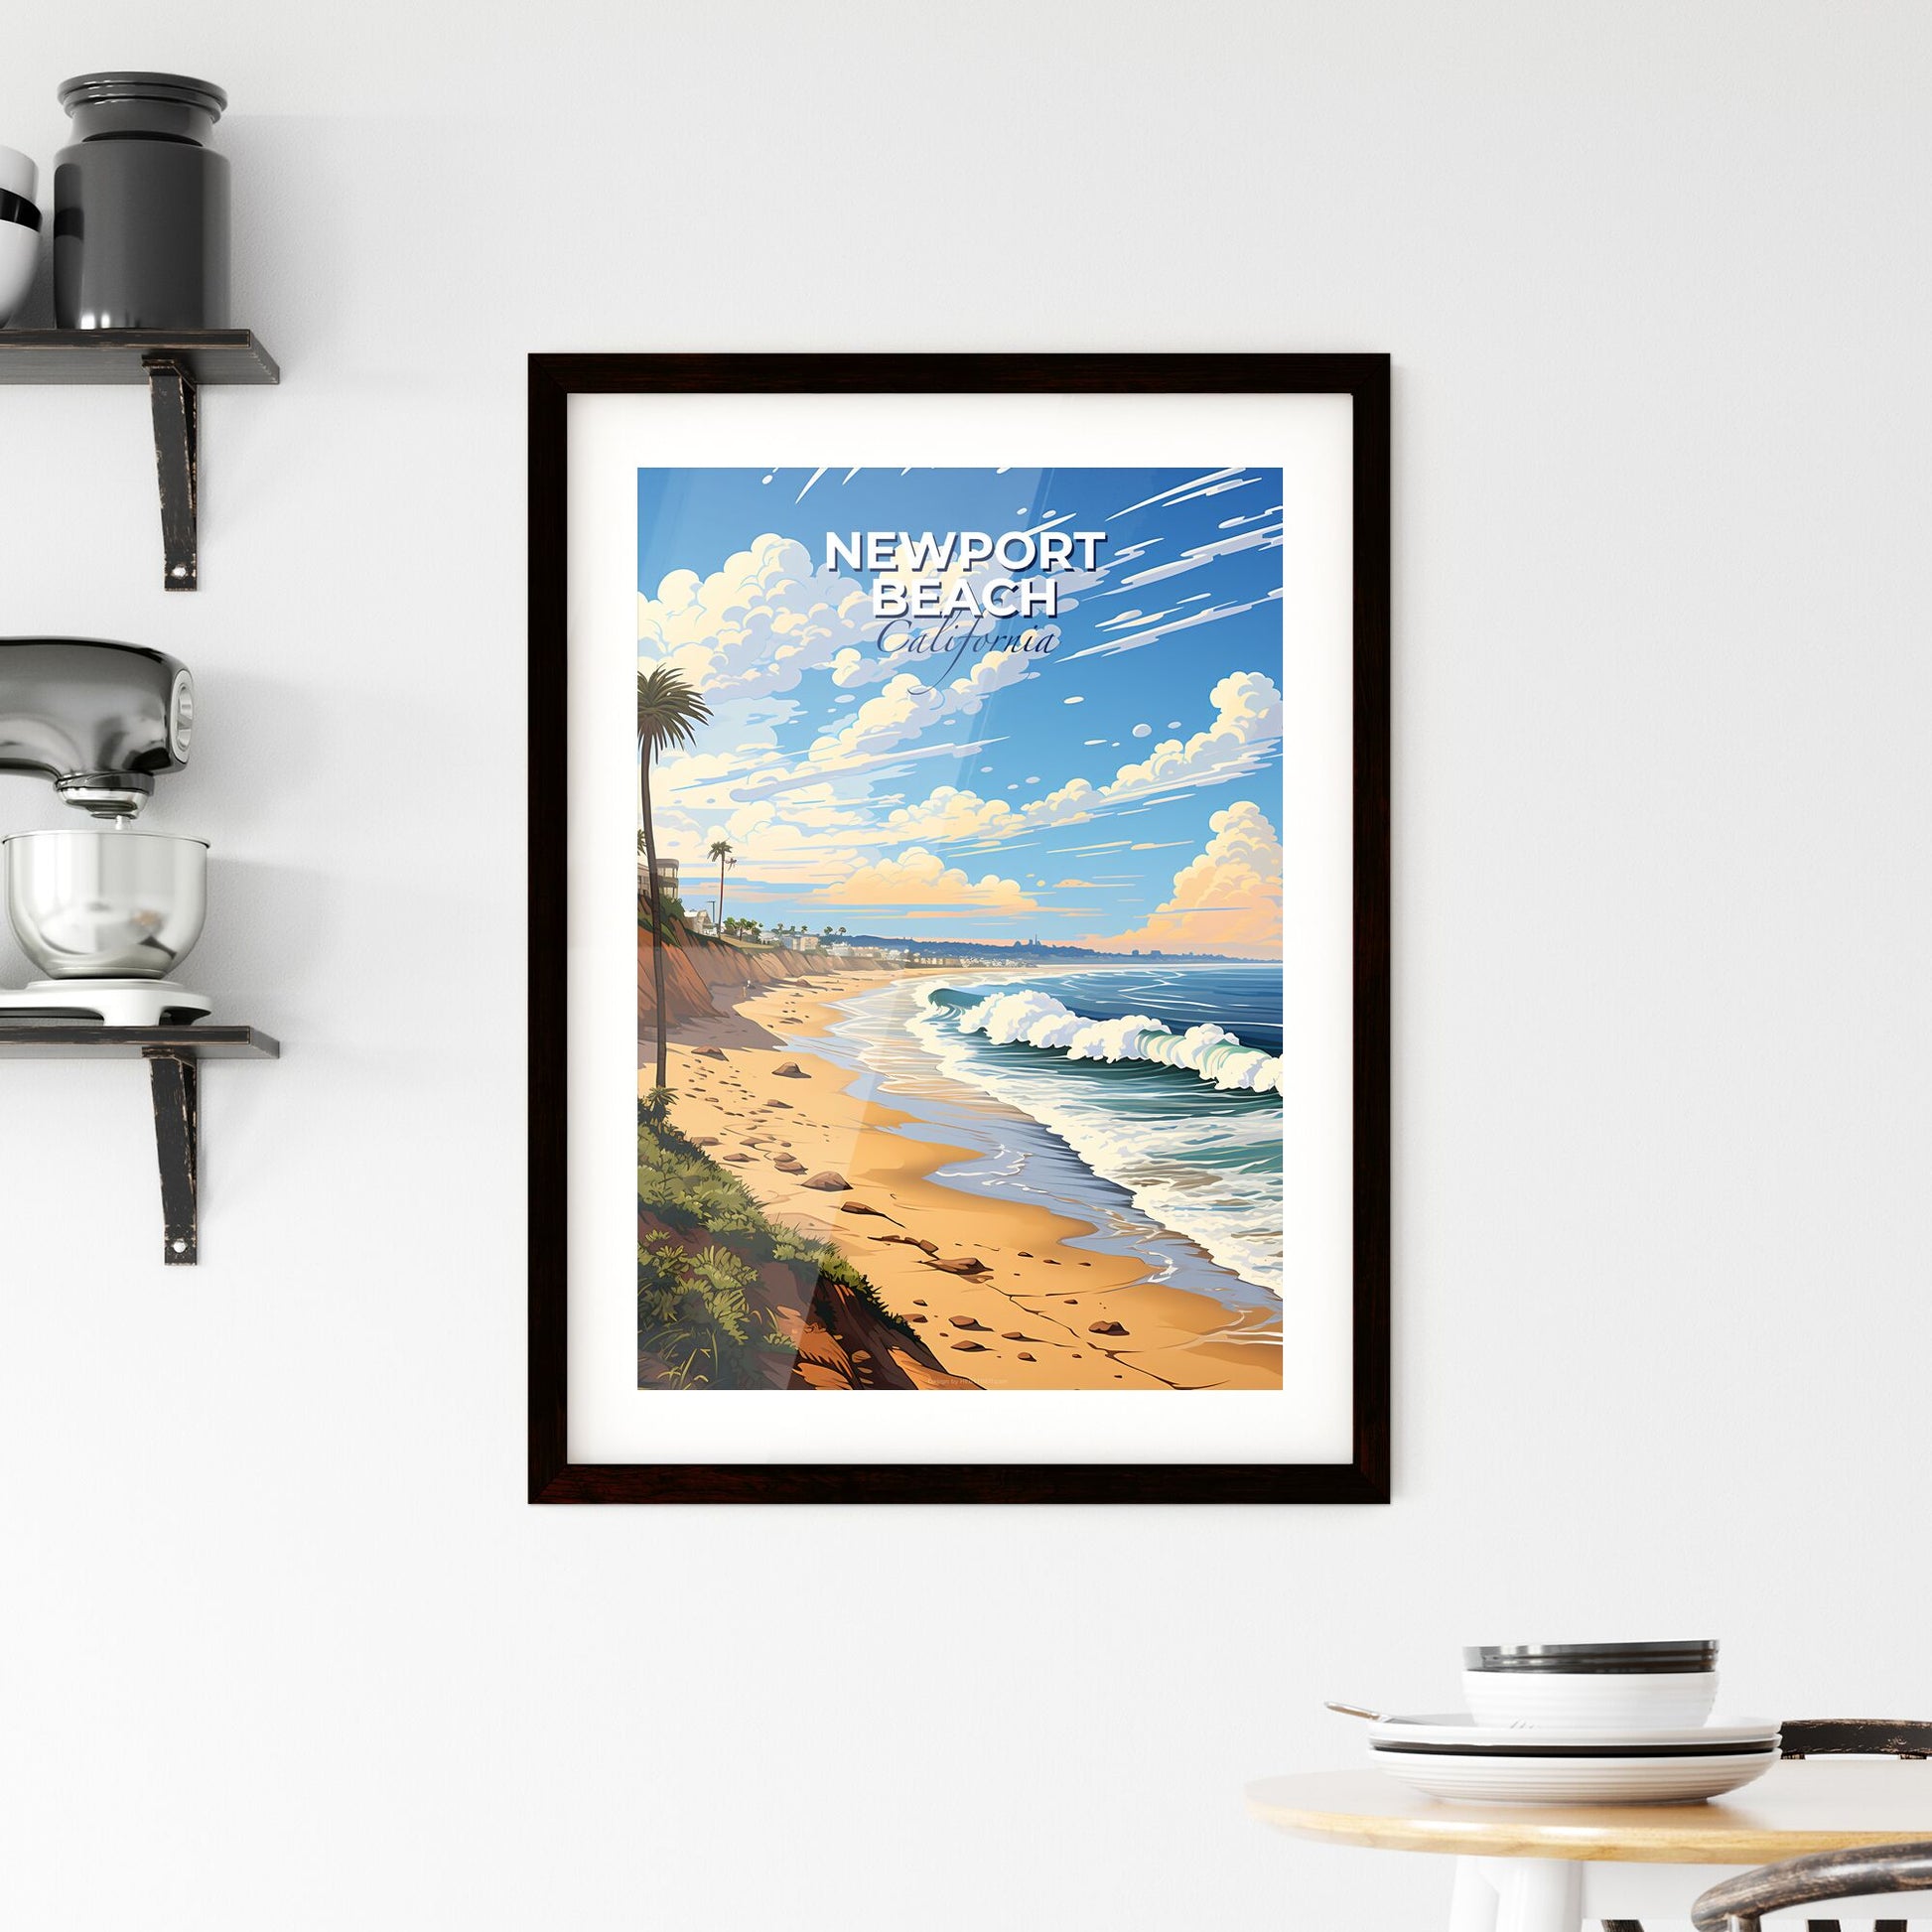 Newport Beach, California, A Poster of a beach with palm trees and waves Default Title